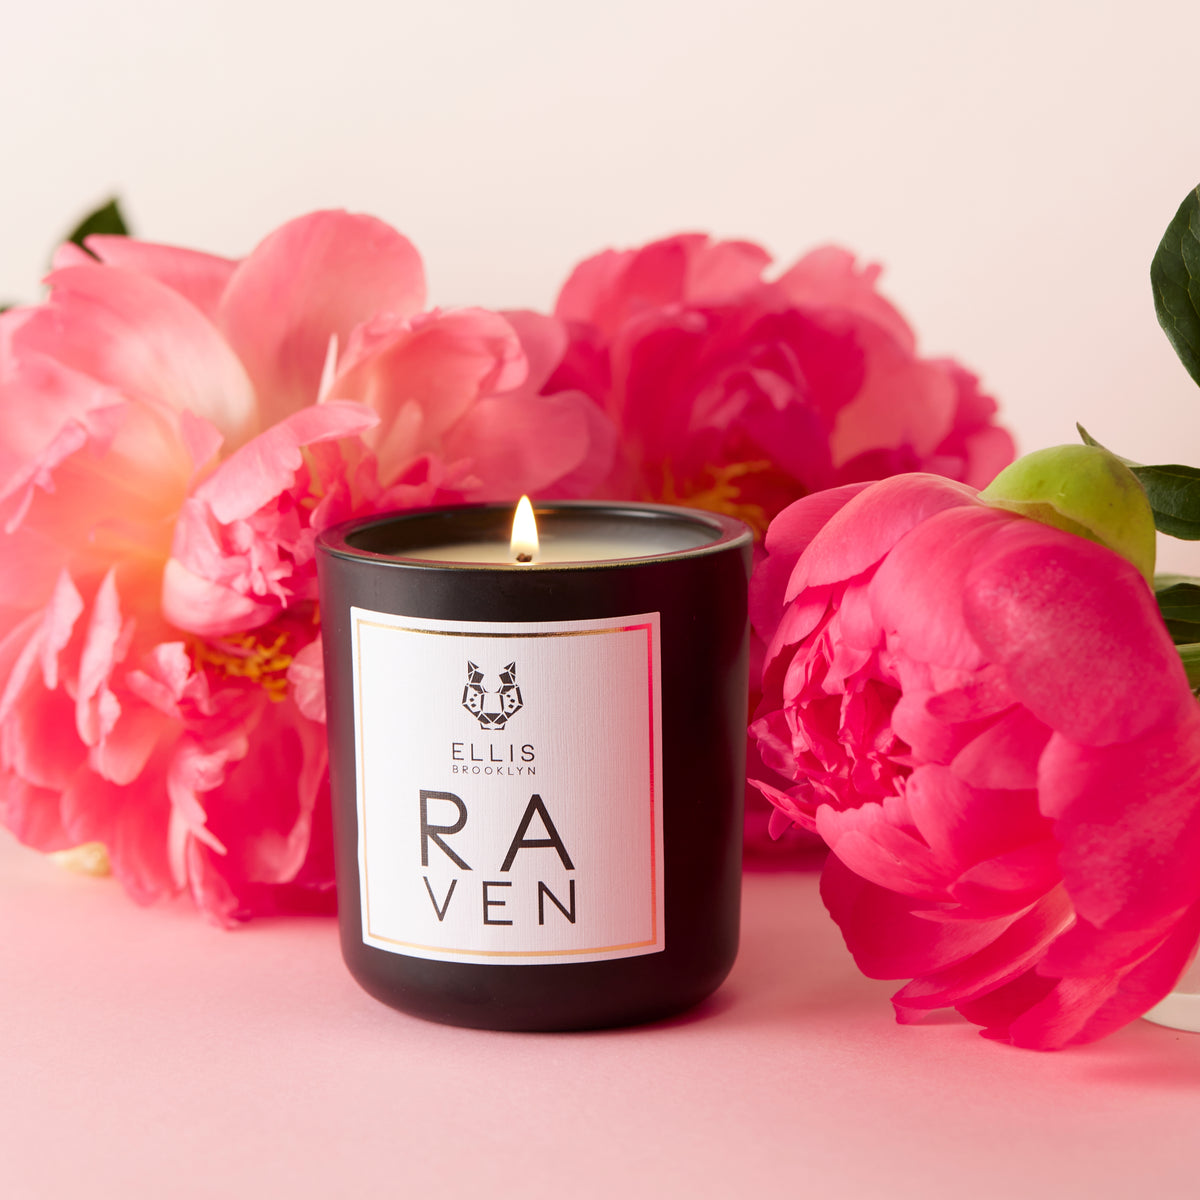 RAVEN candle near flowers